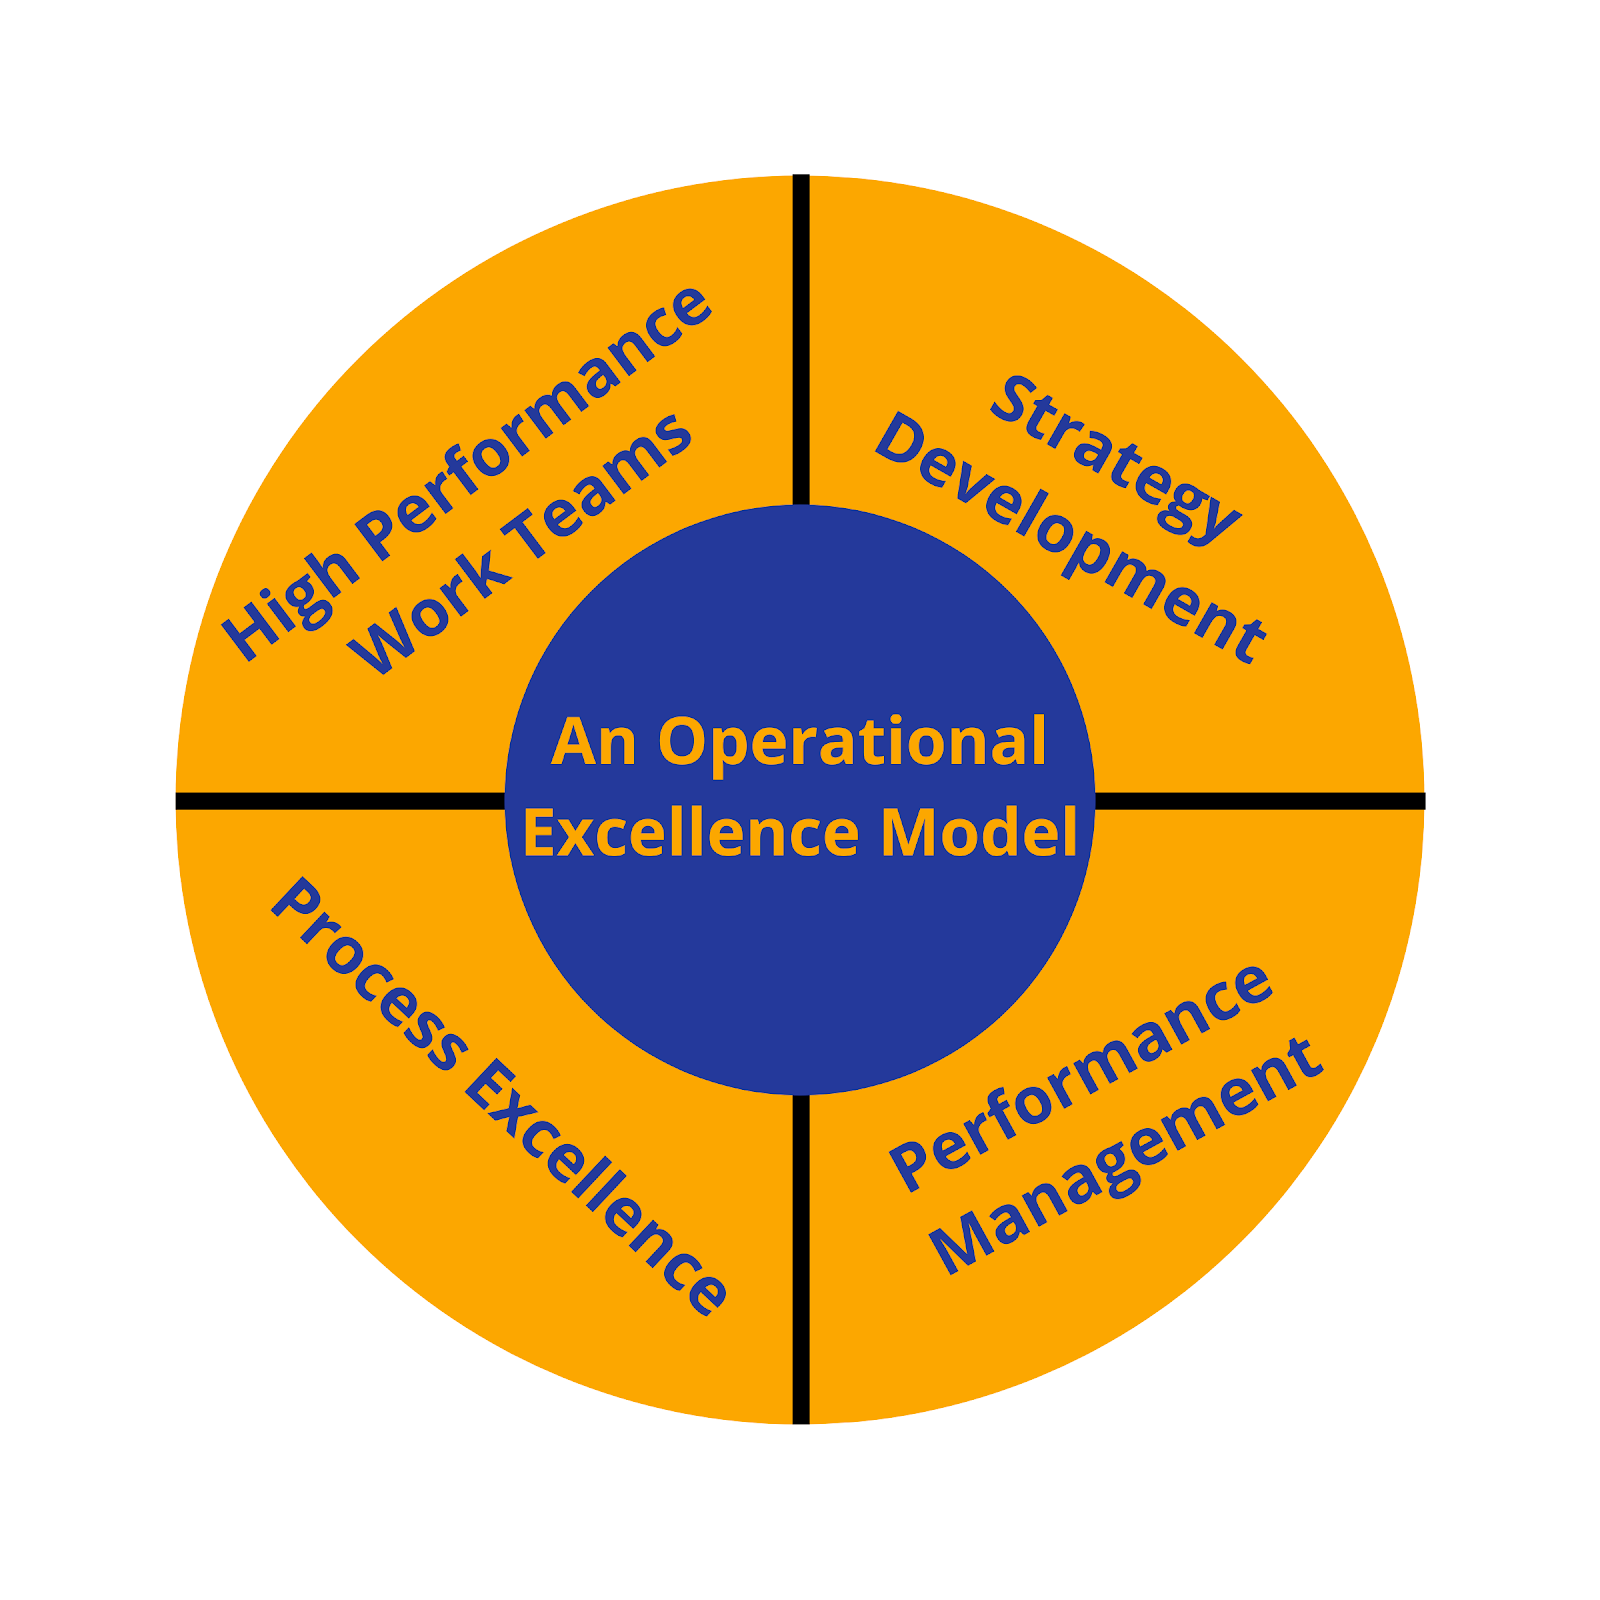 Strategic Operational Excellence Model